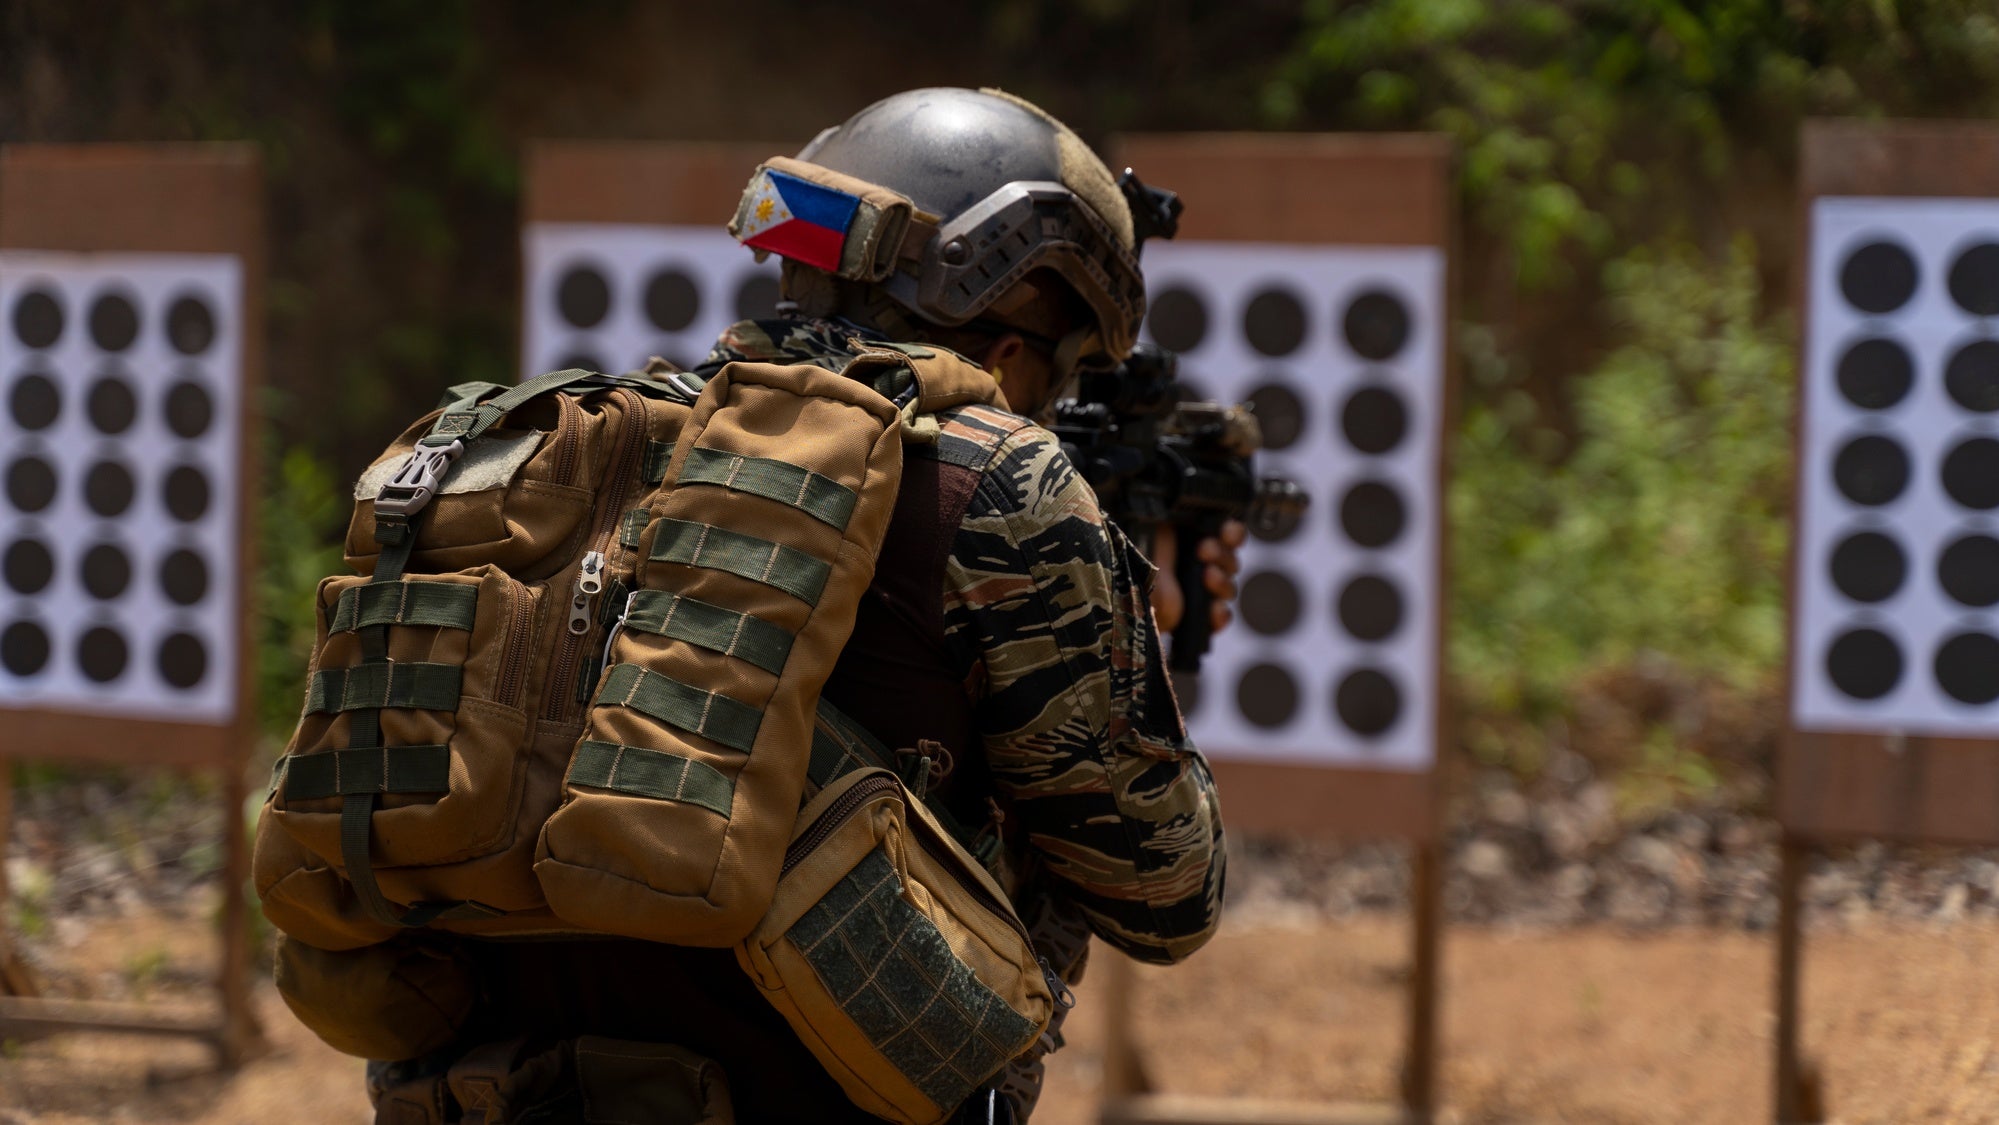 A member of the Philippine Navy Special Operations Group participates in a live-fire range during Balikitan 22 at El Nido, Palawan, Philippines